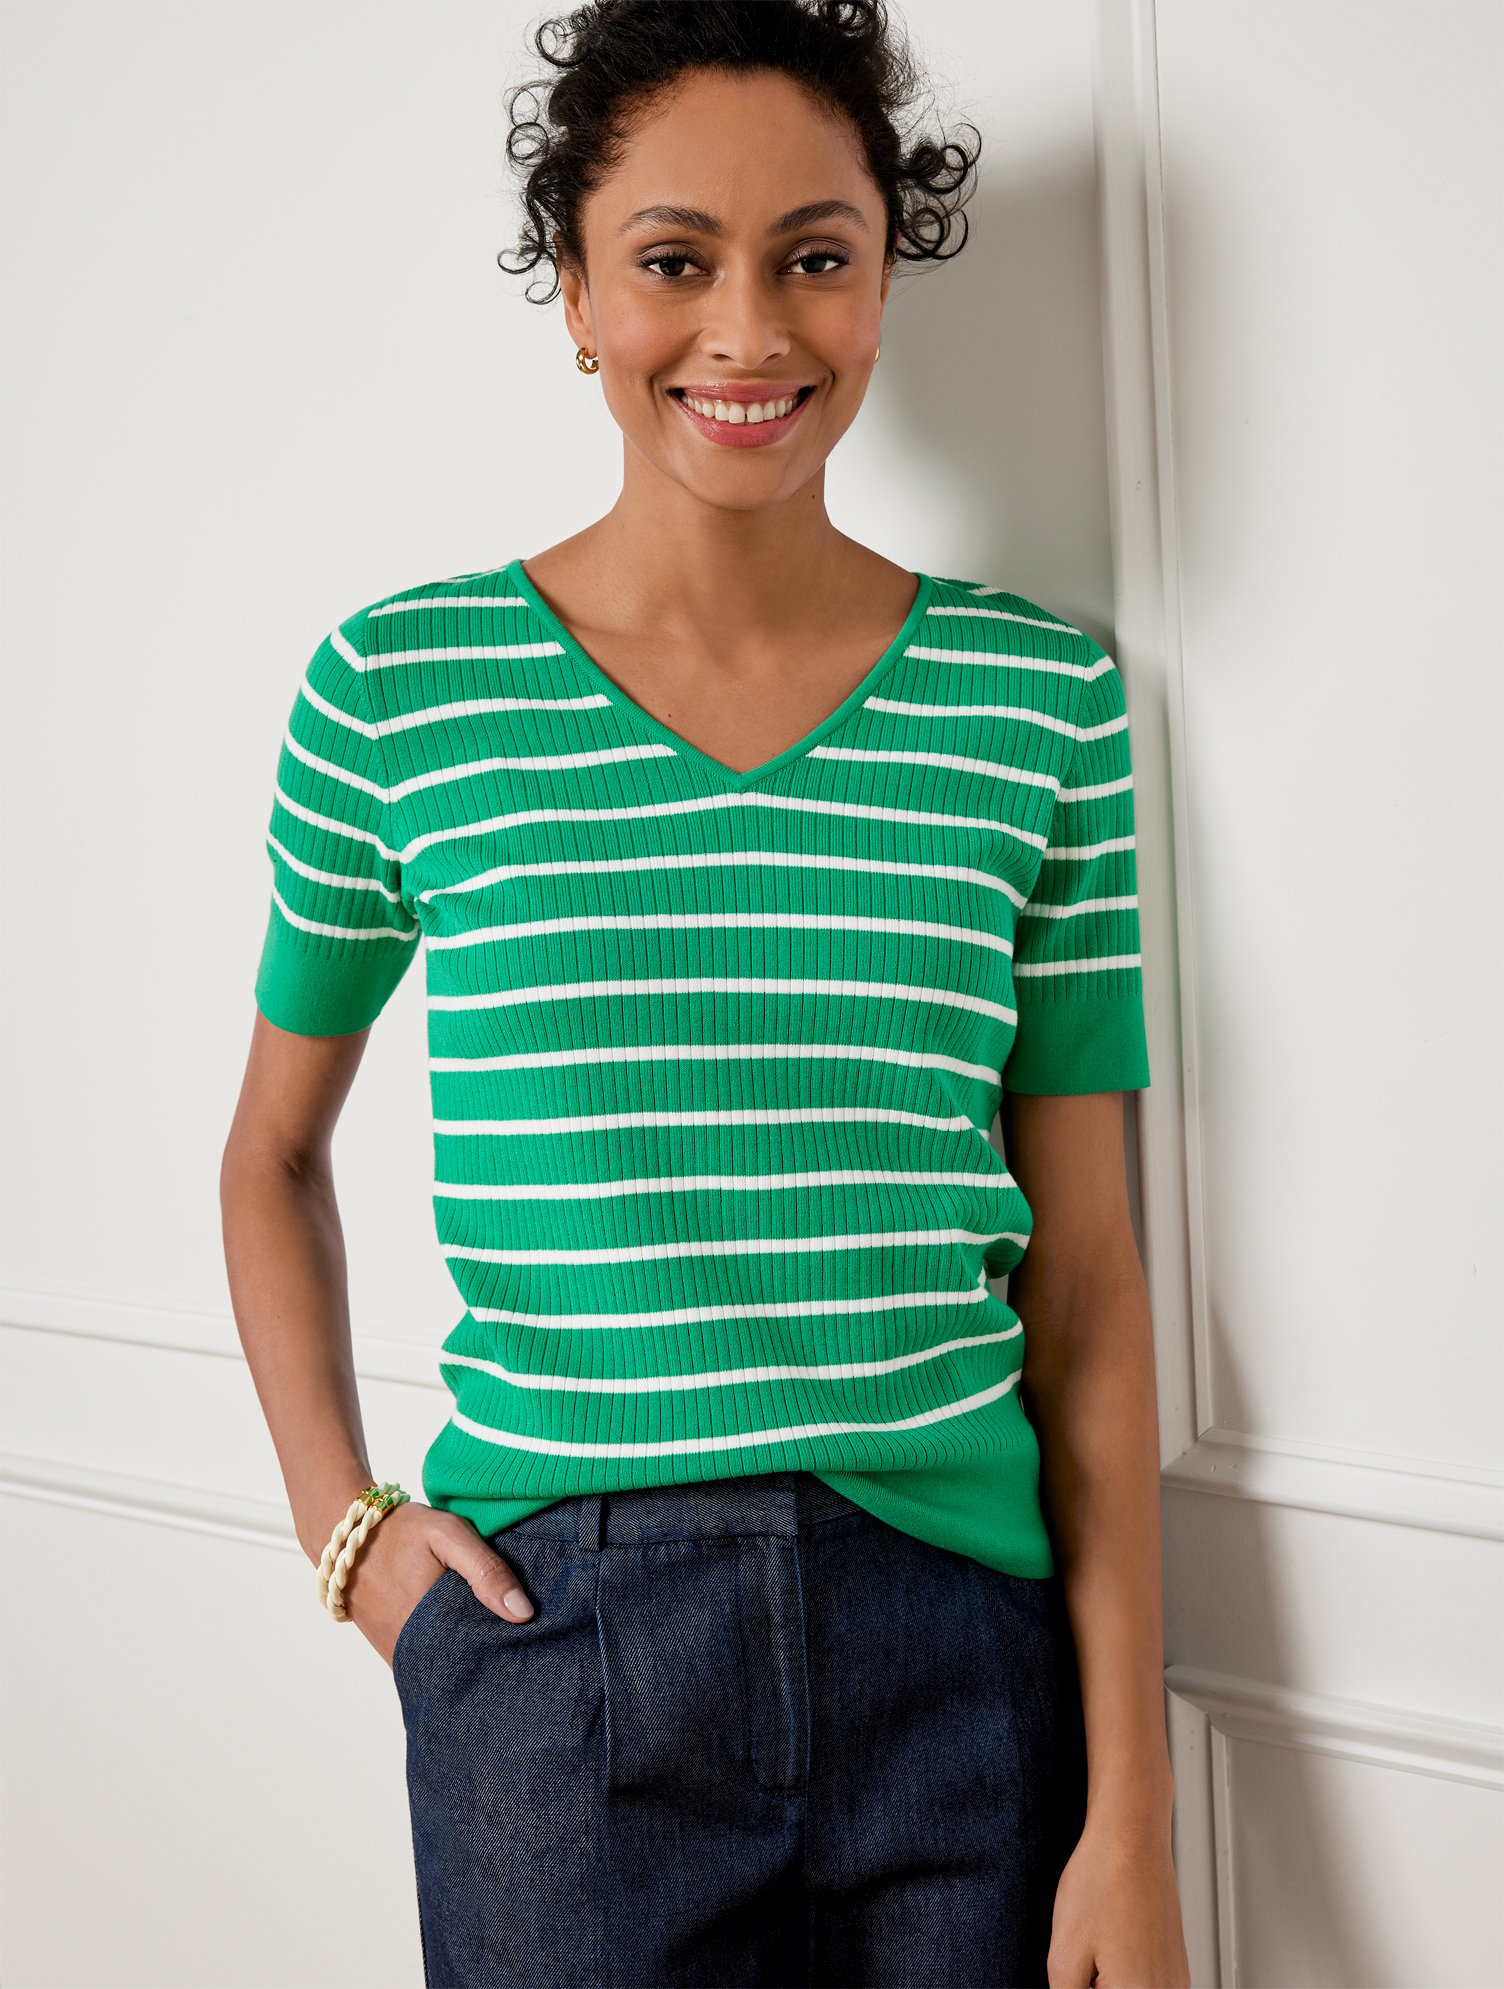 Talbots Plus Size - V-neck Pullover Sweater - Modern Stripe - Simply Green/white - 3x  In Simply Green,white